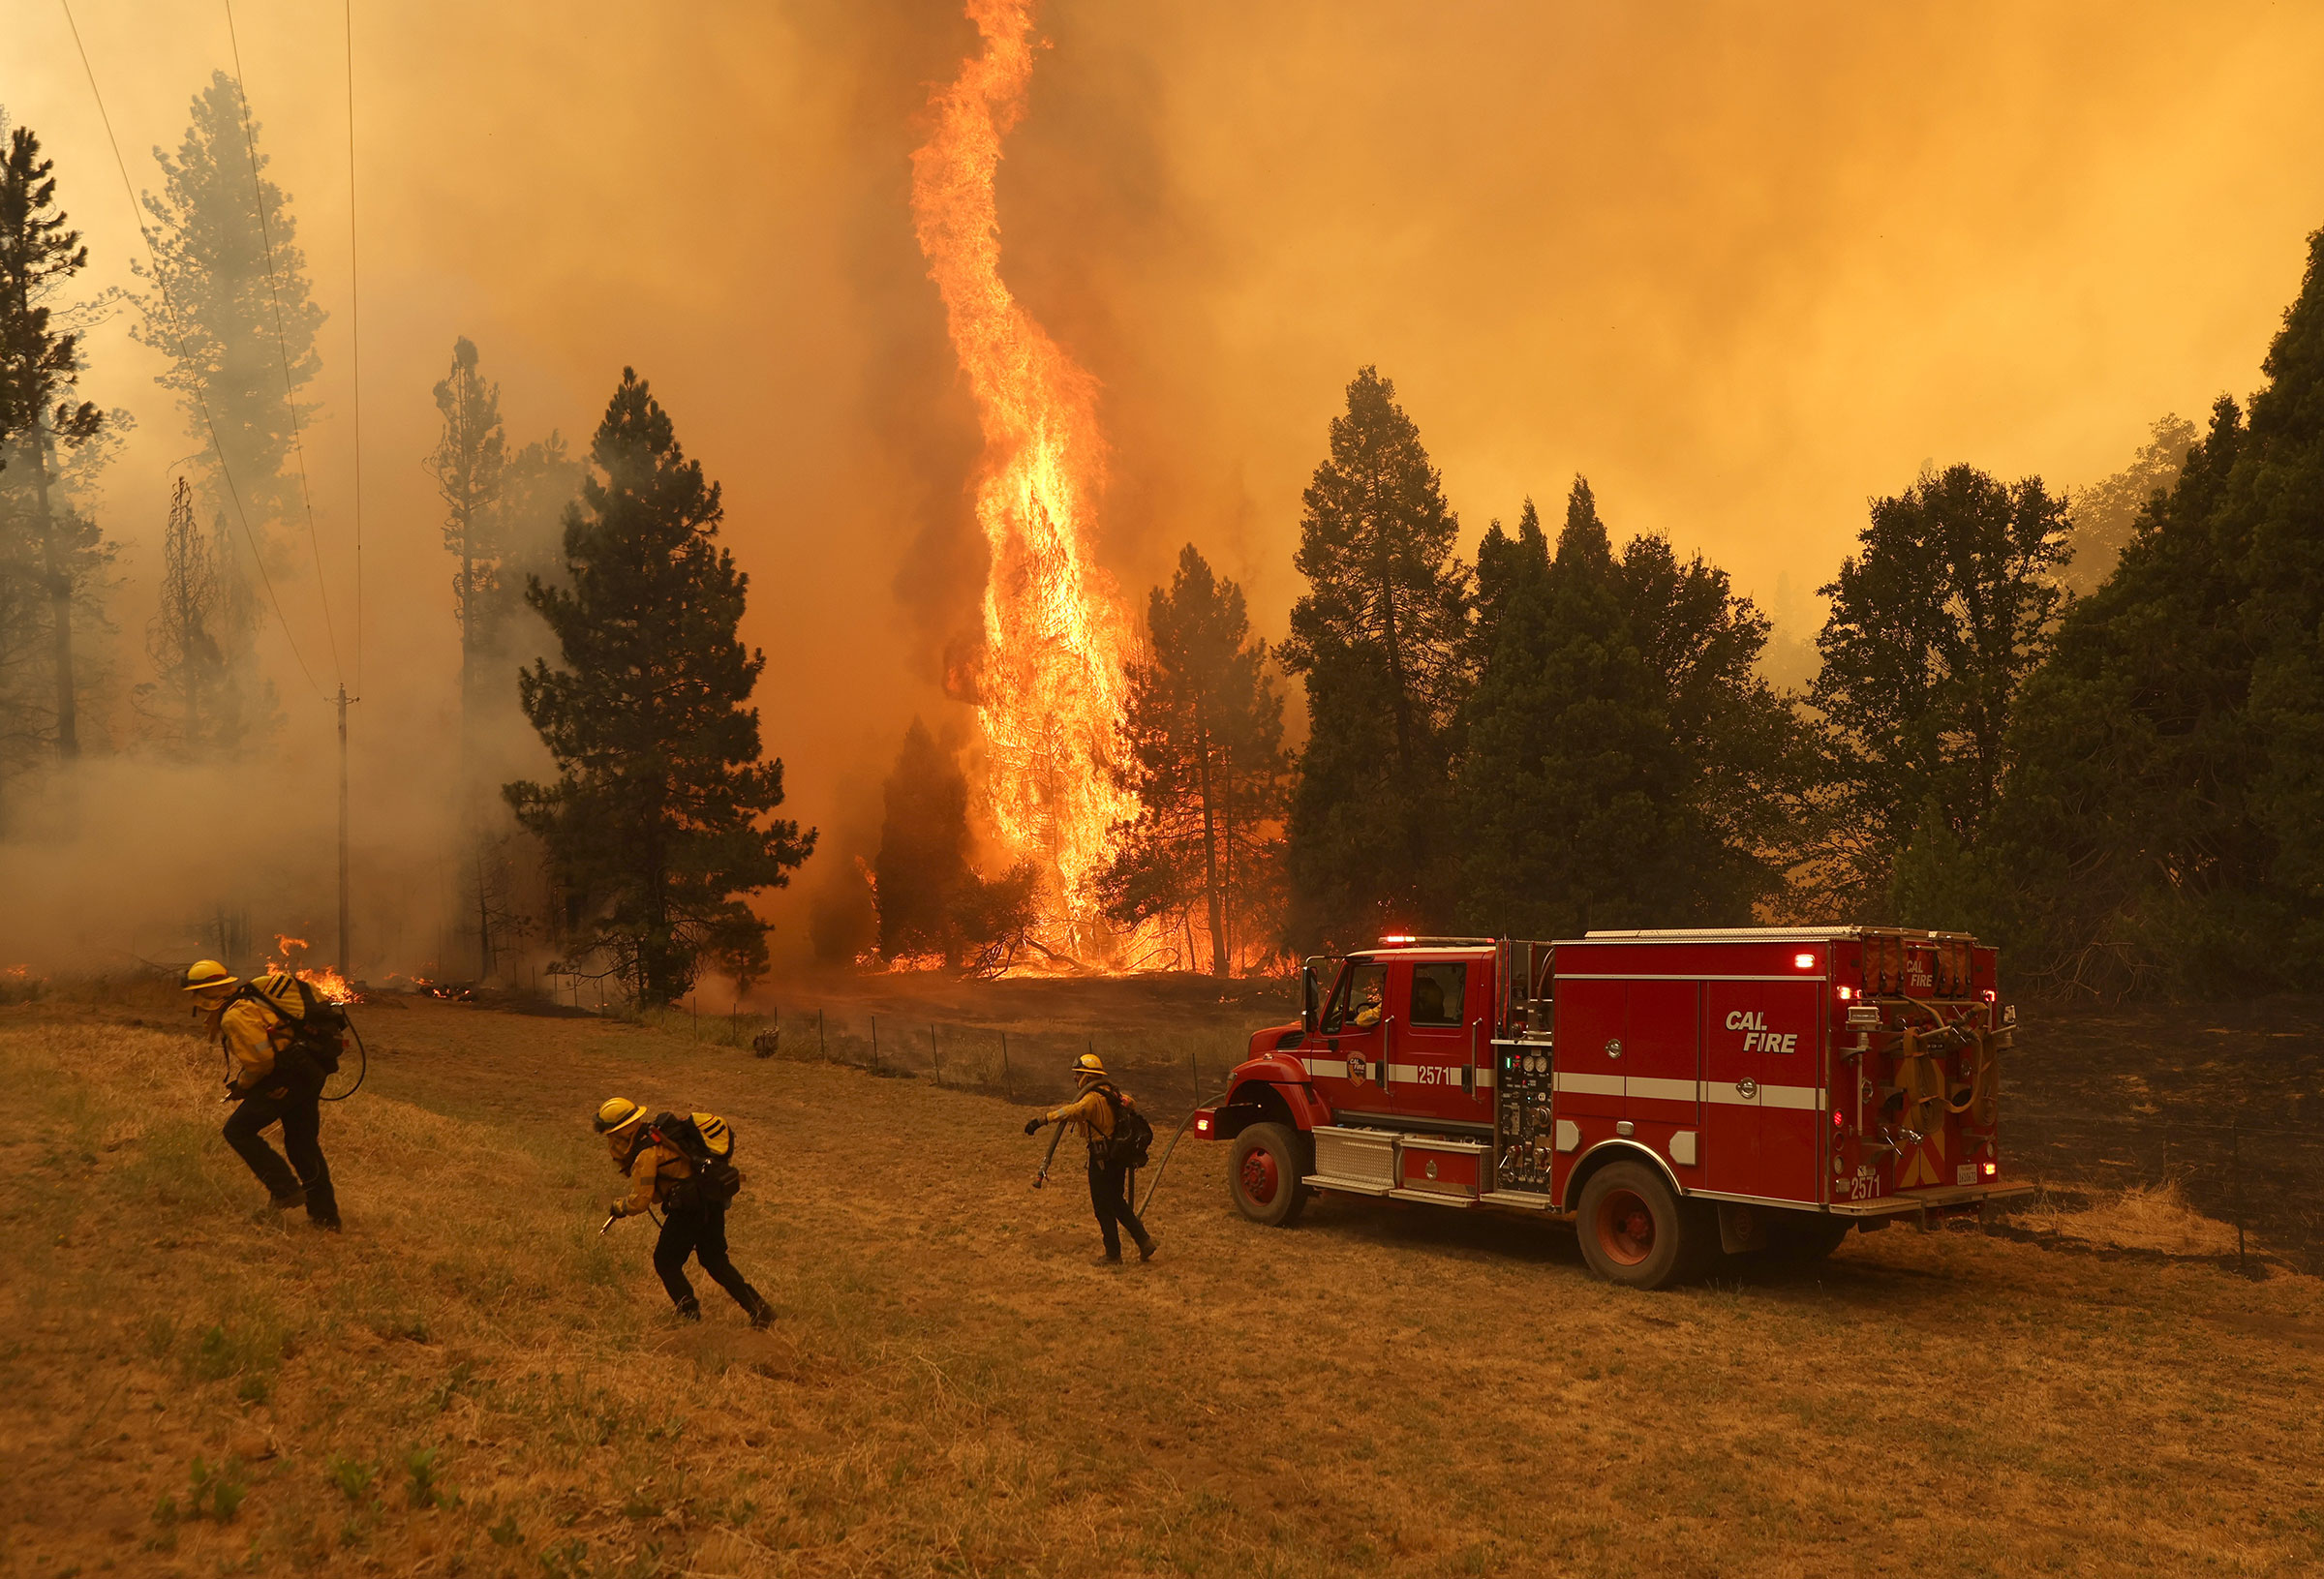 Firefighters battle the Oak Fire near Mariposa, Calif., on July 23. The fast moving Oak Fire burning outside of Yosemite National Park has forced evacuations, charred over 11,500 acres and destroyed several homes. (Justin Sullivan—Getty Images)